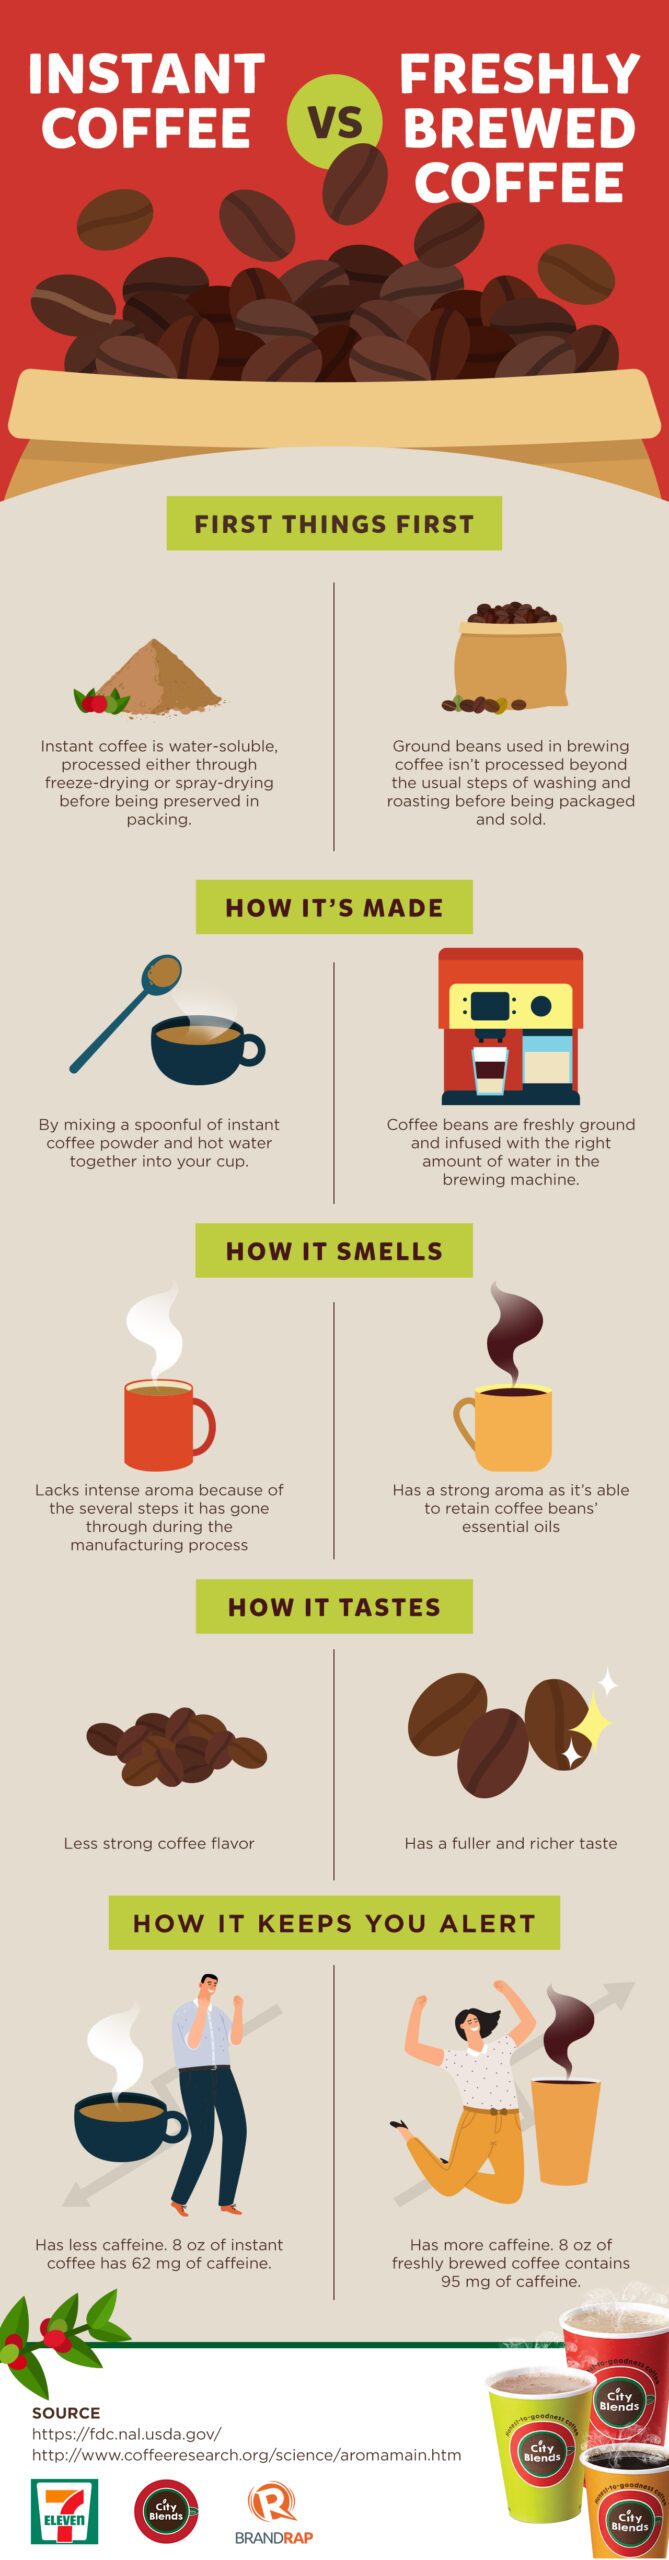 INFOGRAPHIC: Why it’s time to switch from instant coffee to freshly brewed coffee